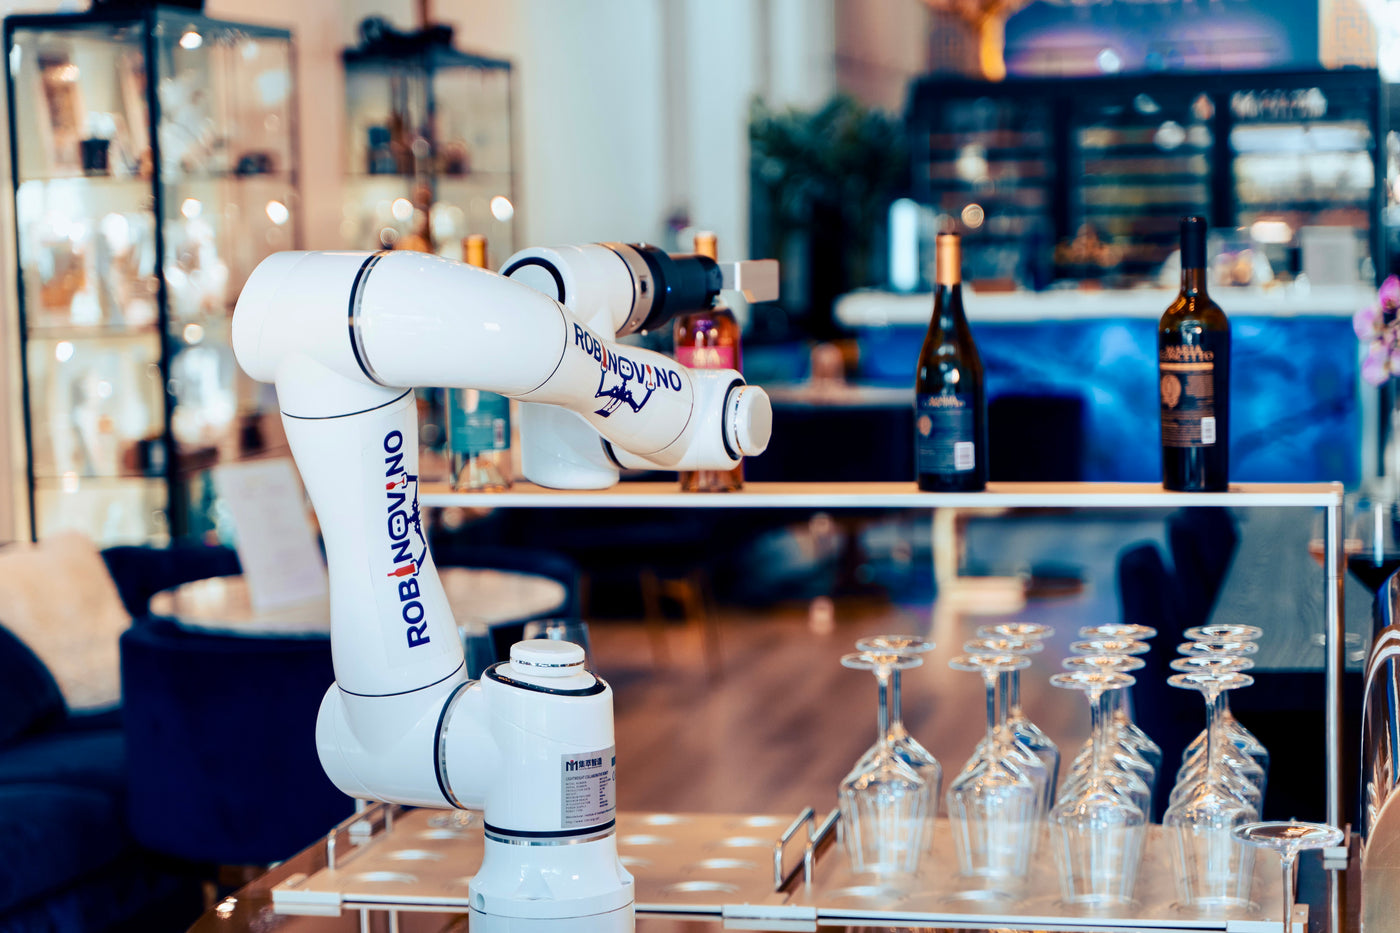 Wine tasting with Robot sommelier - 4 wines: $75